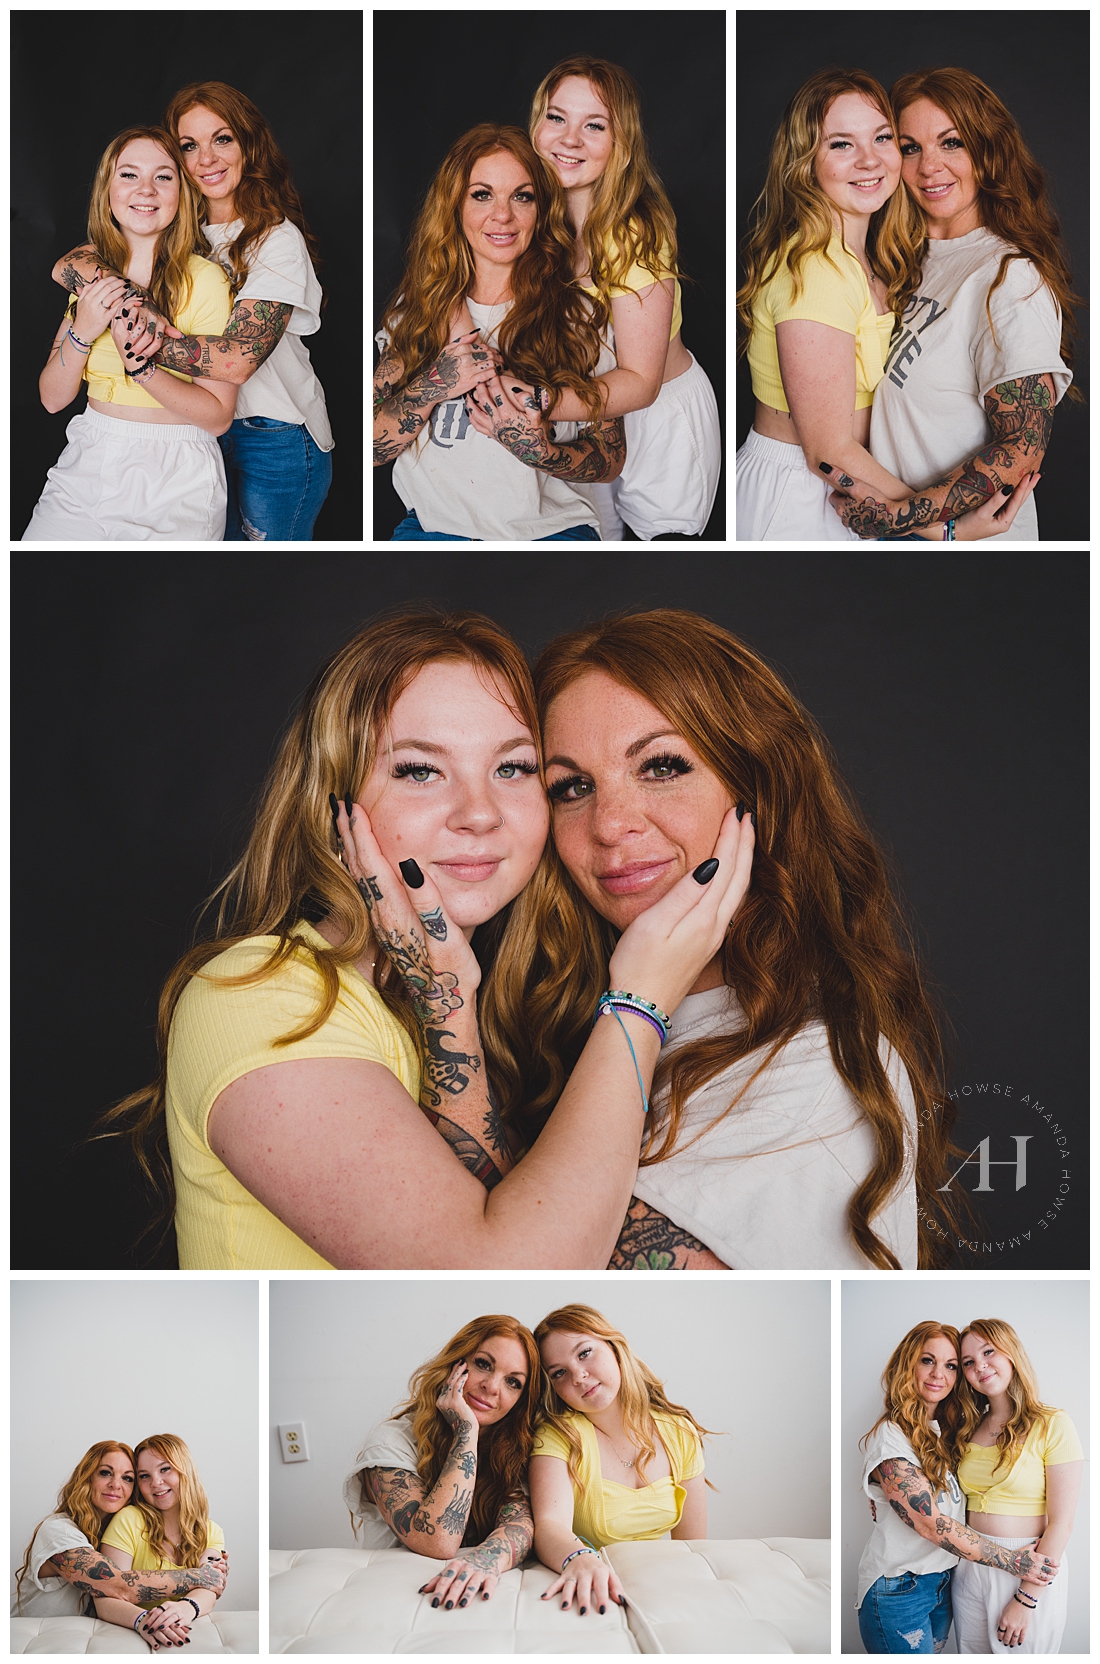 Fun Red Head Portraits with Mom and Daughter | Cute and Casual Mother-Daughter Outfit Ideas For Pre-Graduation Shoot | Photographed by the Best Tacoma Washington Senior Photographer Amanda Howse Photography